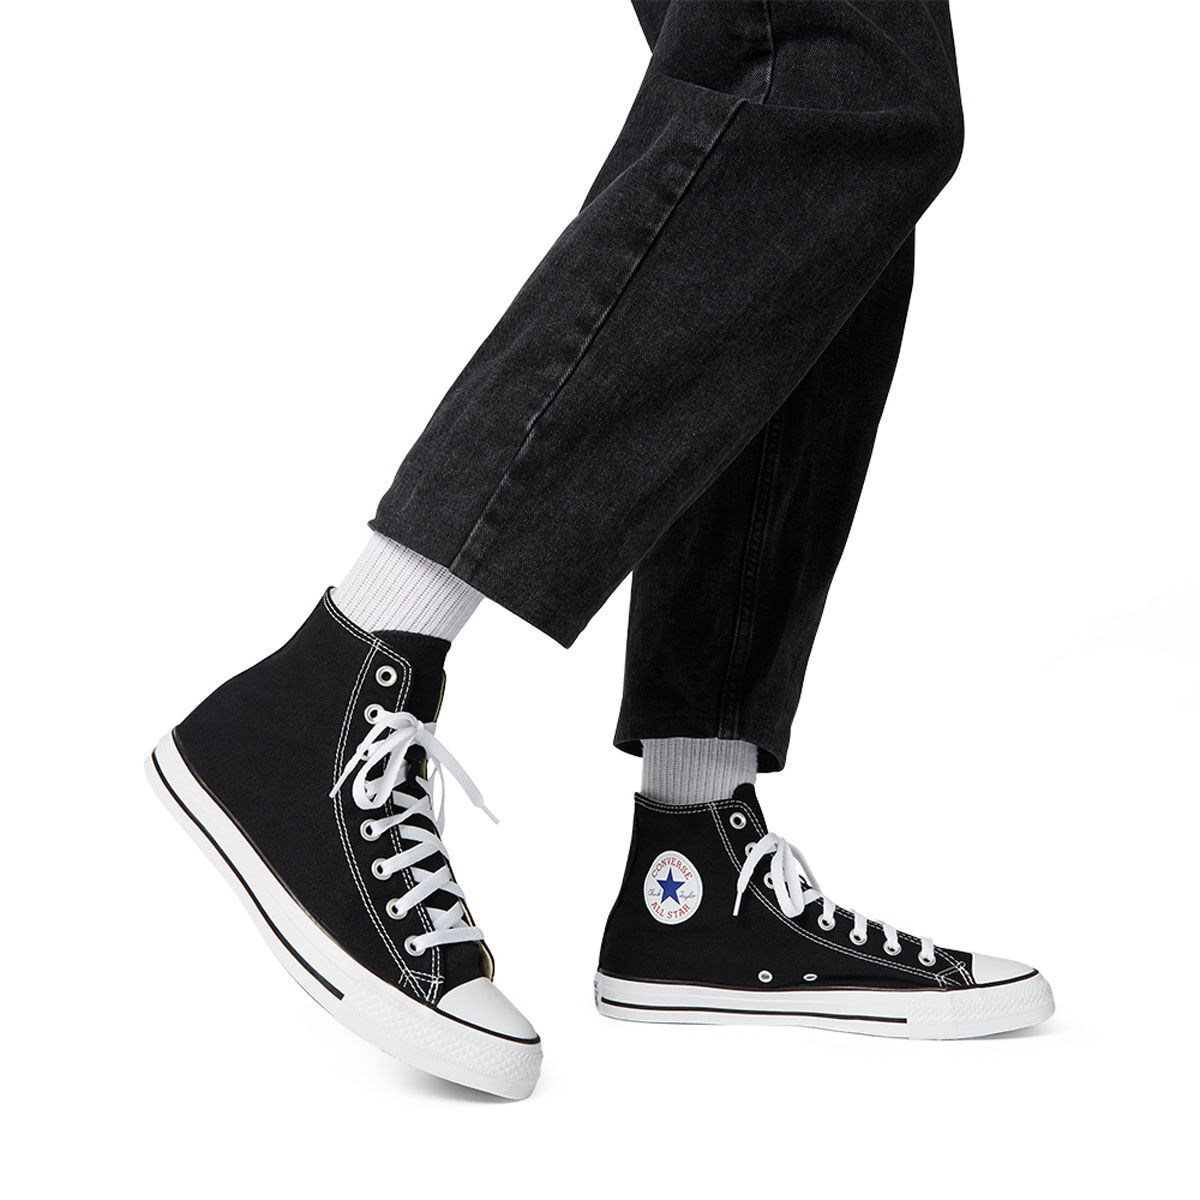 Converse Chuck Taylor All Star Hi Top Casual Shoes Black/White US